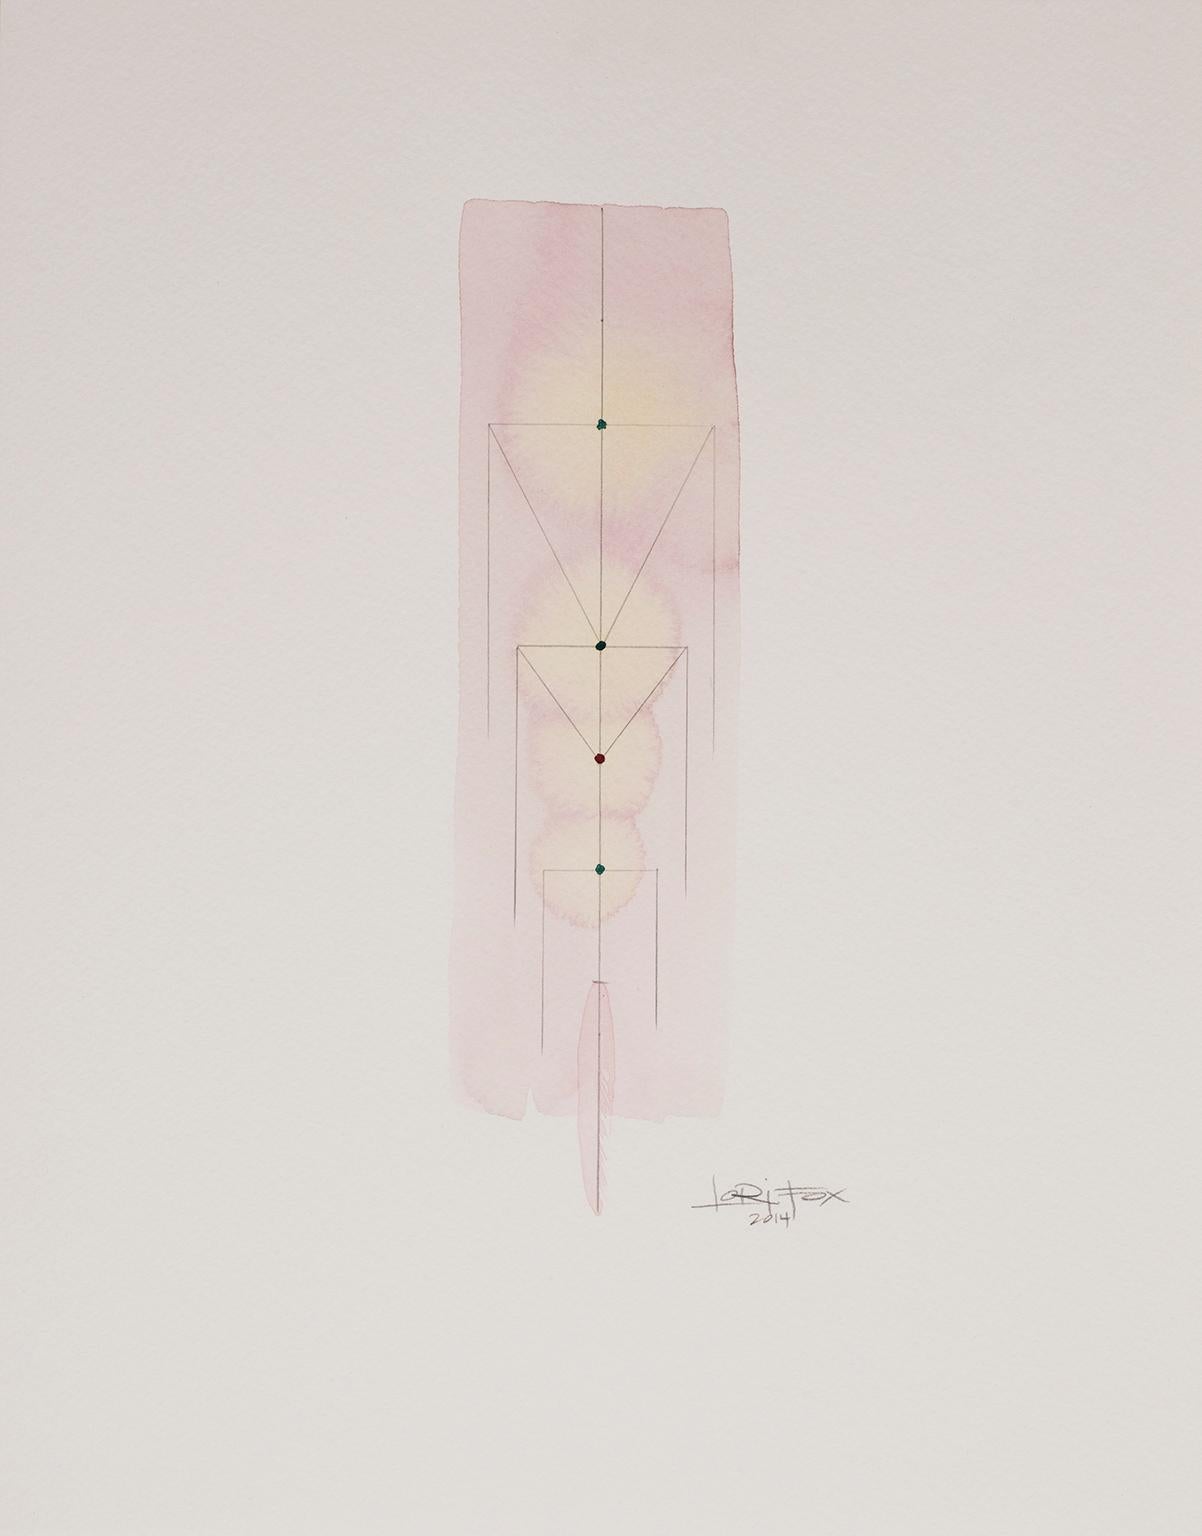 Lori Fox Abstract Drawing - Totem 5.003. Abstract architectural forms Pink and coral watercolor and pencil